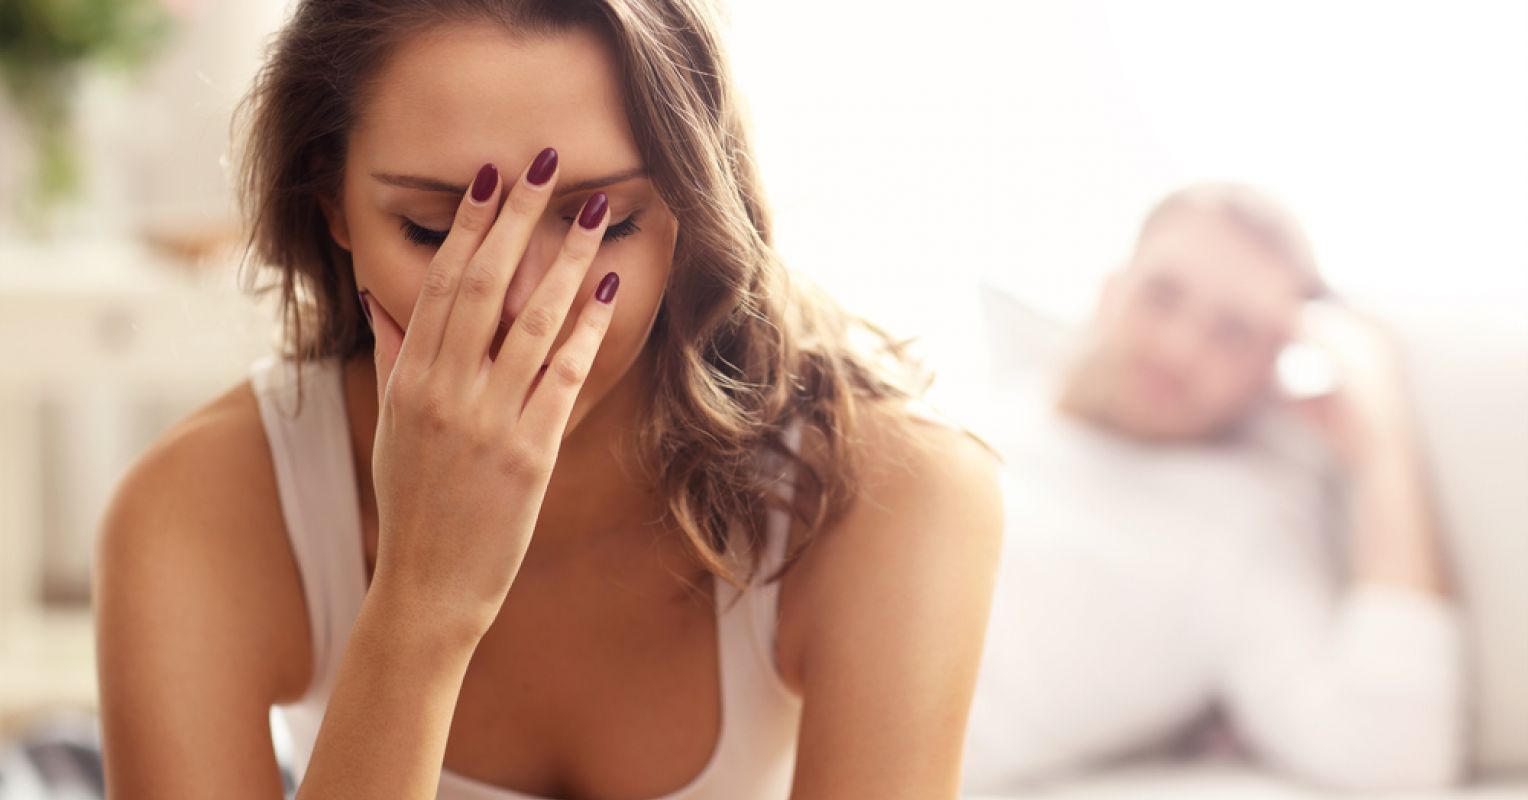 Should You Tell Your Partner You Cheated? Psychology Today pic